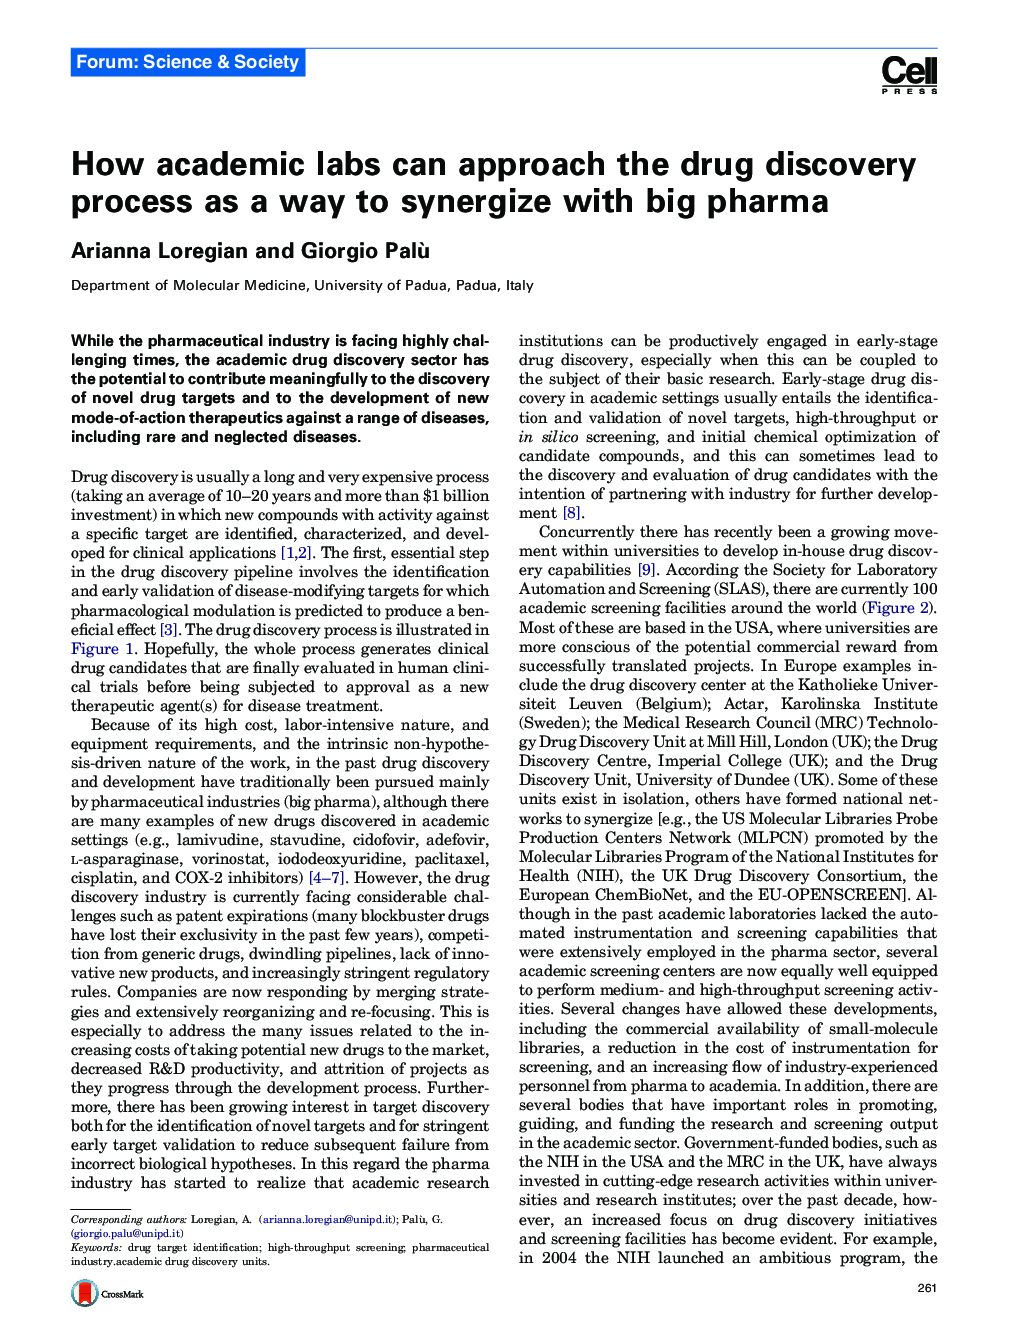 How academic labs can approach the drug discovery process as a way to synergize with big pharma